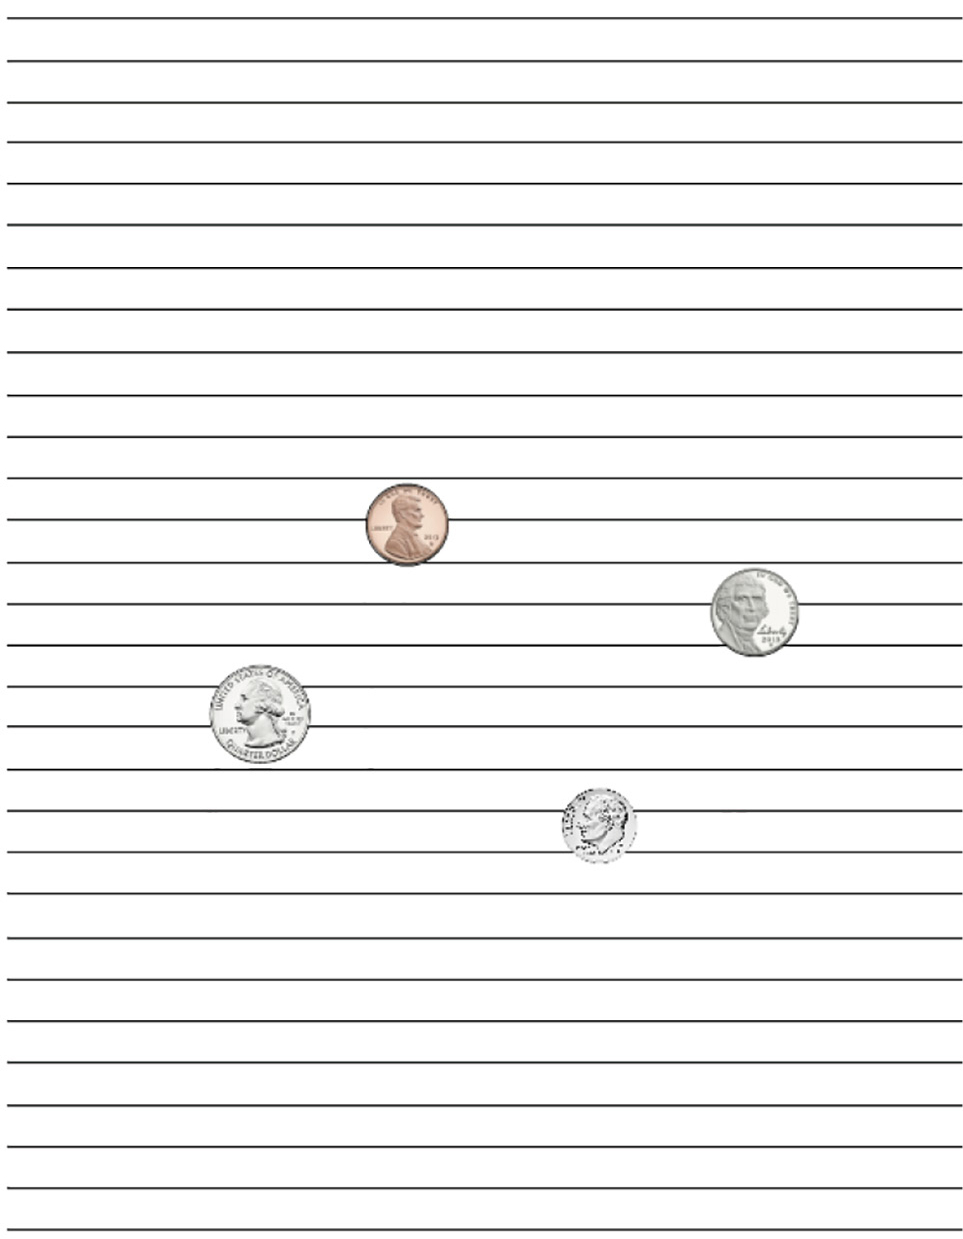  Paper with lines and coins.